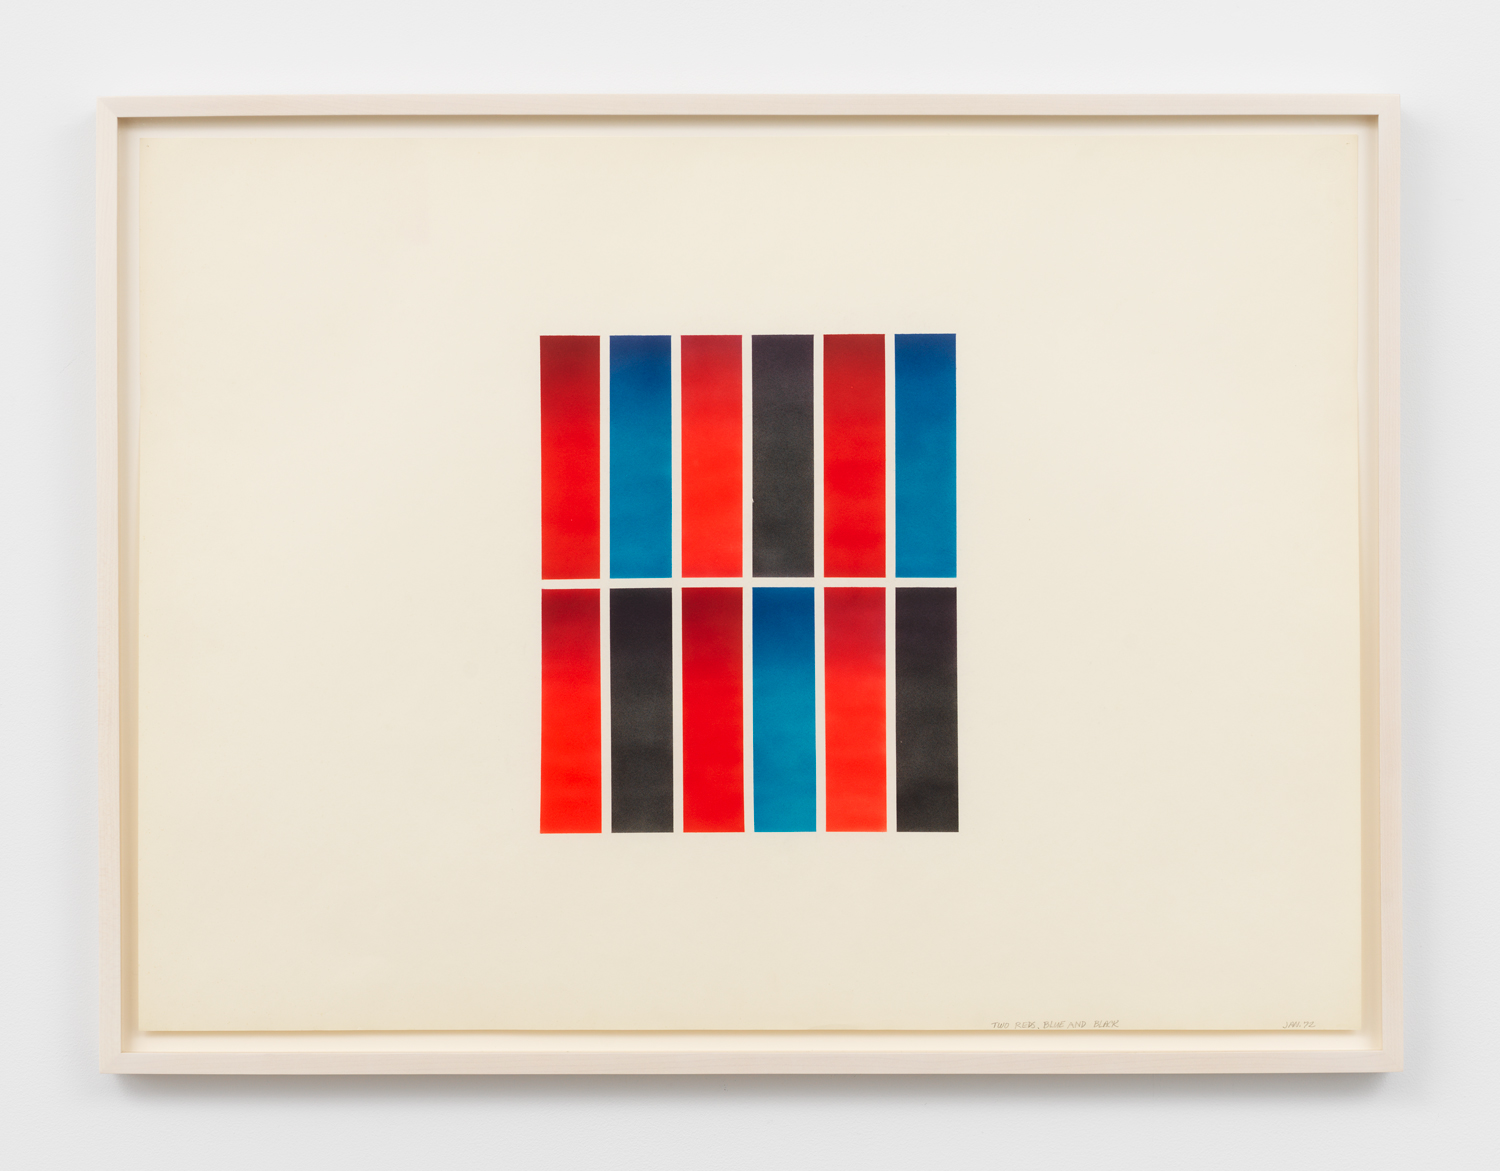 Don Dudley, Two Reds, Blue and Black, 1972, airbrush ink on paper, 23h x 29w in.